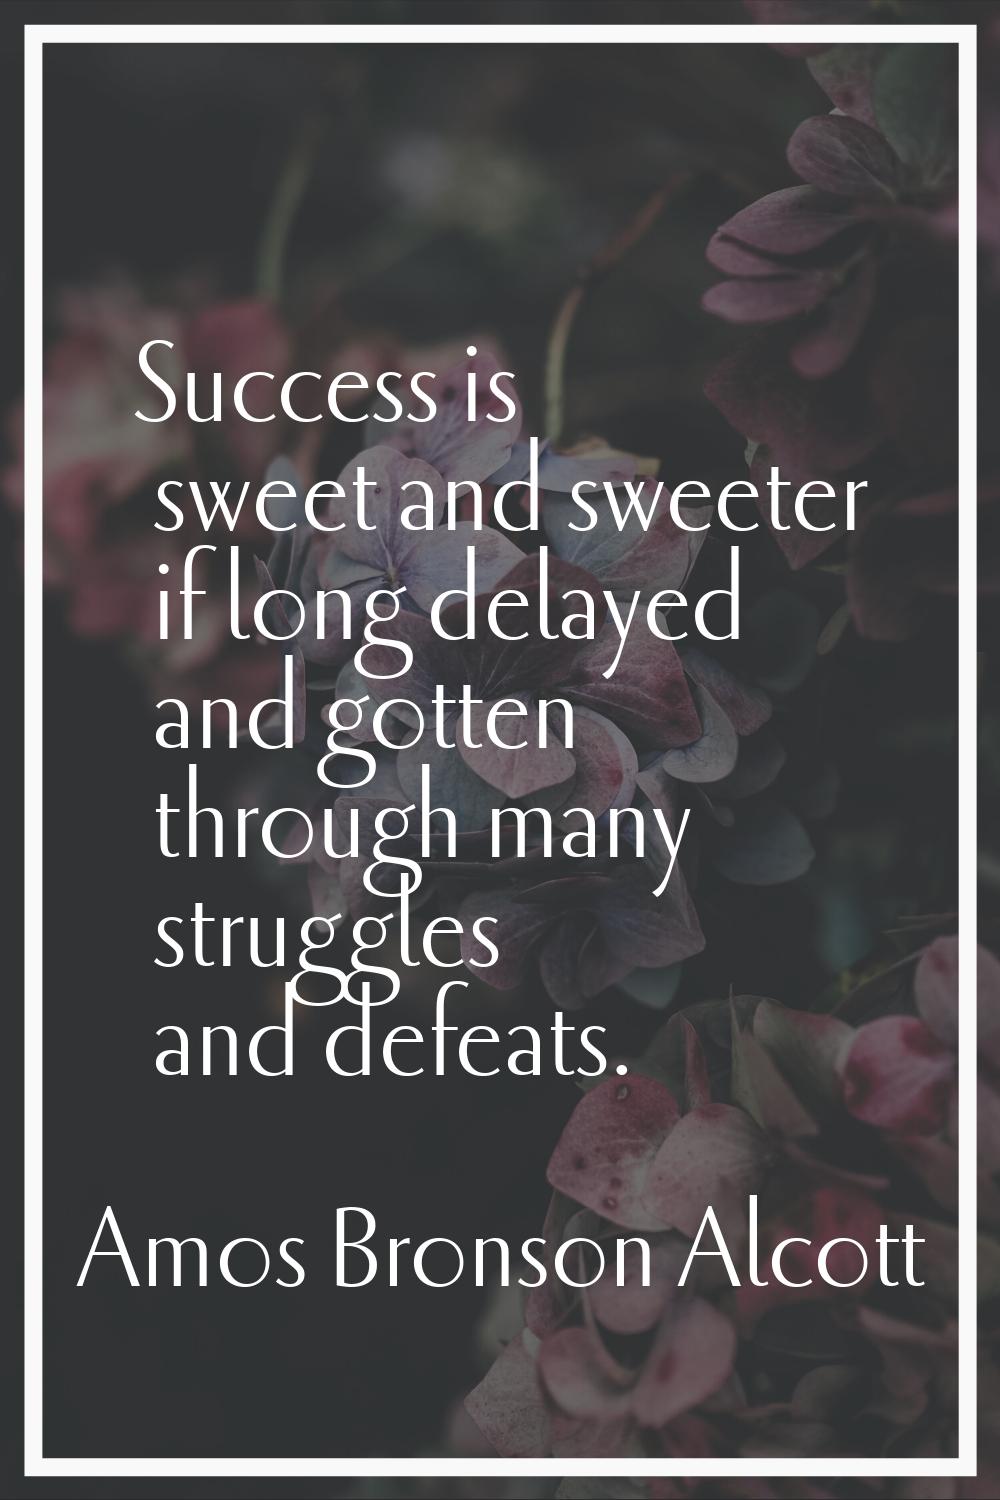 Success is sweet and sweeter if long delayed and gotten through many struggles and defeats.